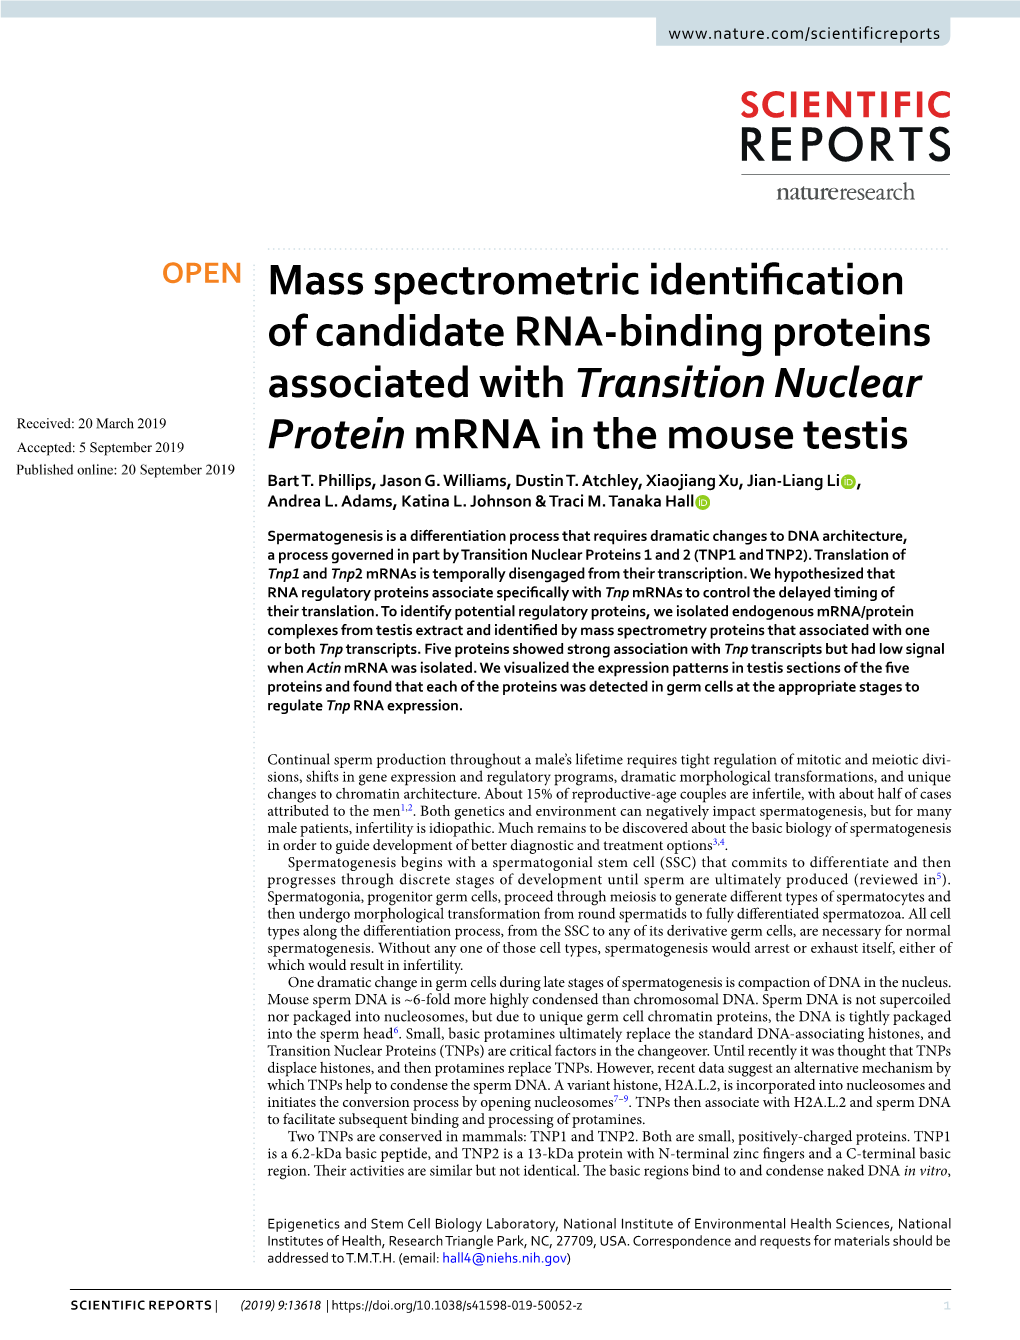 Mass Spectrometric Identification of Candidate RNA-Binding Proteins Associated with Transition Nuclear Protein Mrna in the Mouse